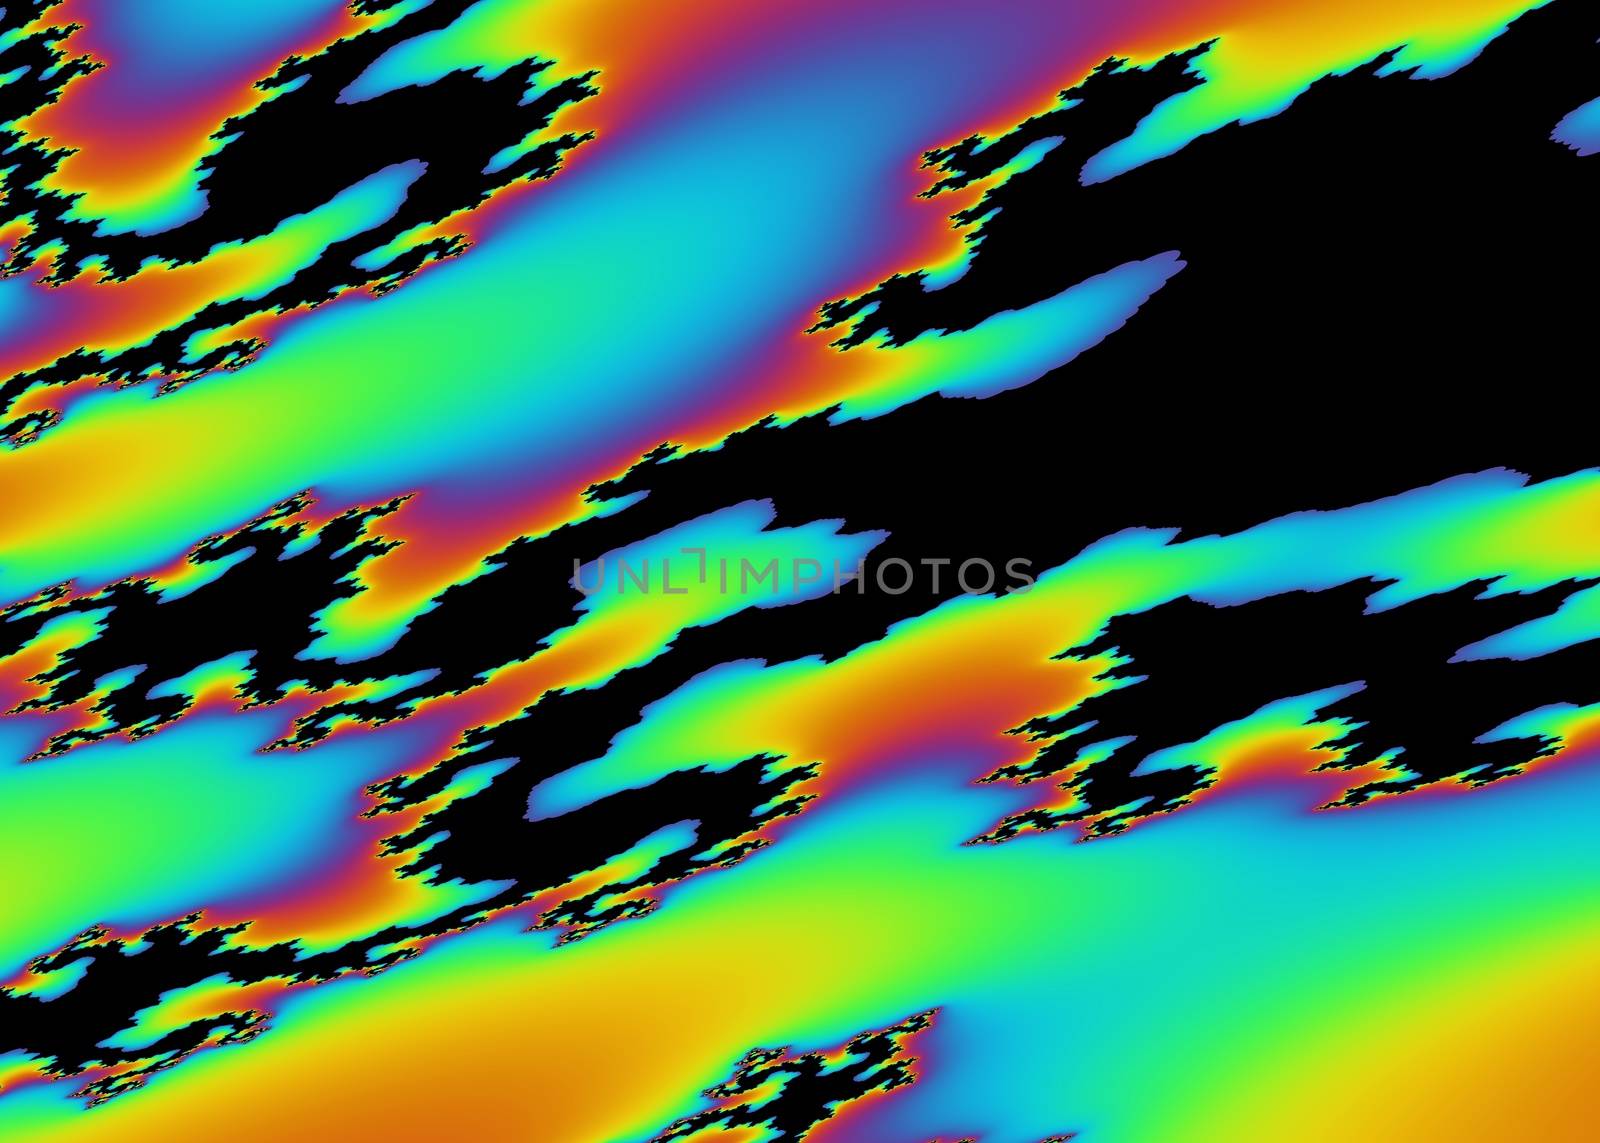 Rainbow Abstract Fractal Background - Colorful Illustration in Diagonal Direction on Black, Image